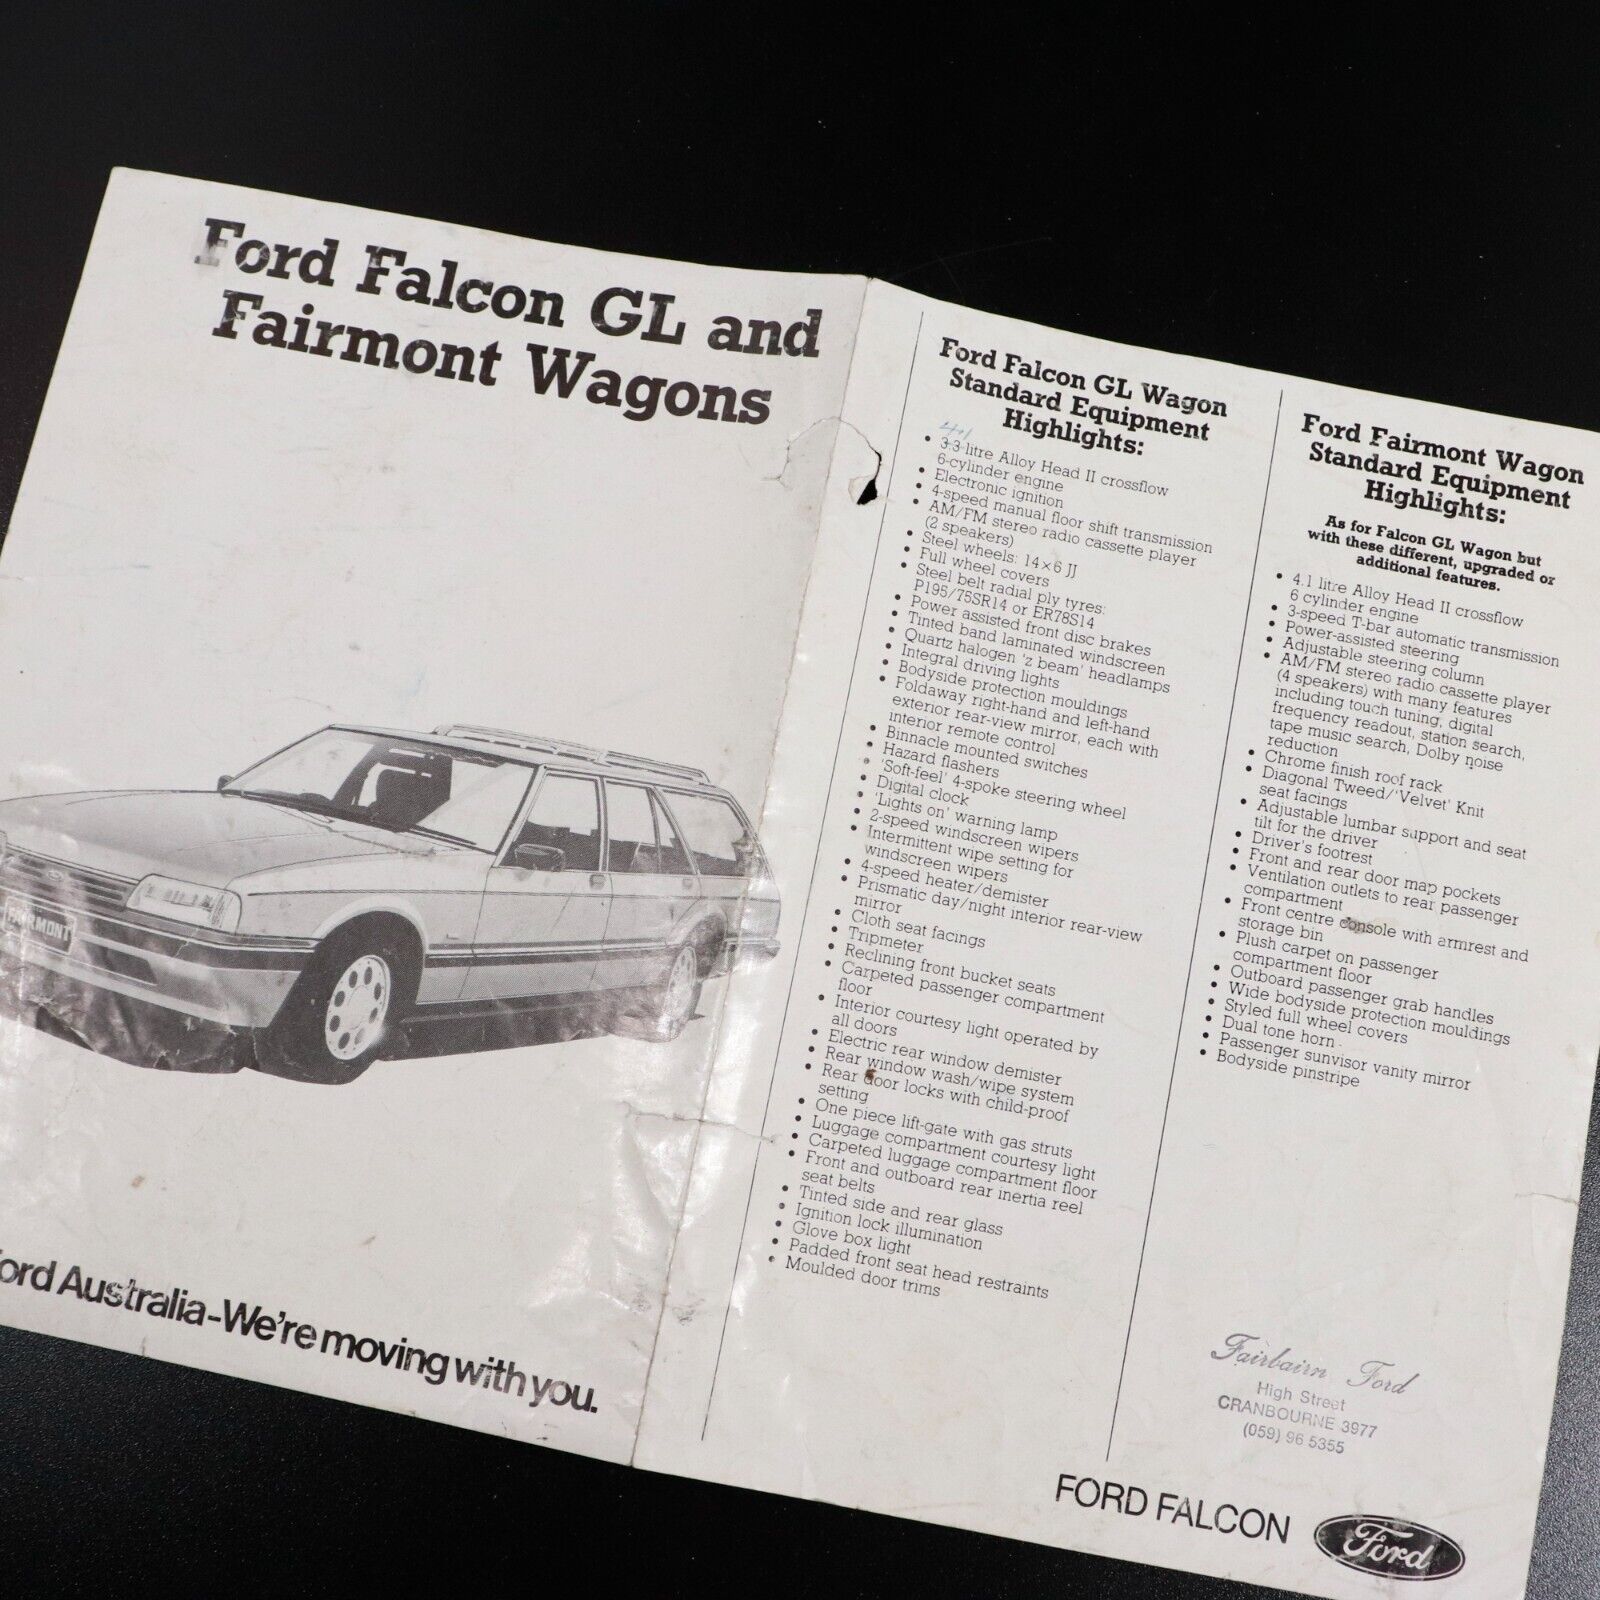 1985 Ford Falcon Fairmont XF Owners Manual & Service Books Automotive Book